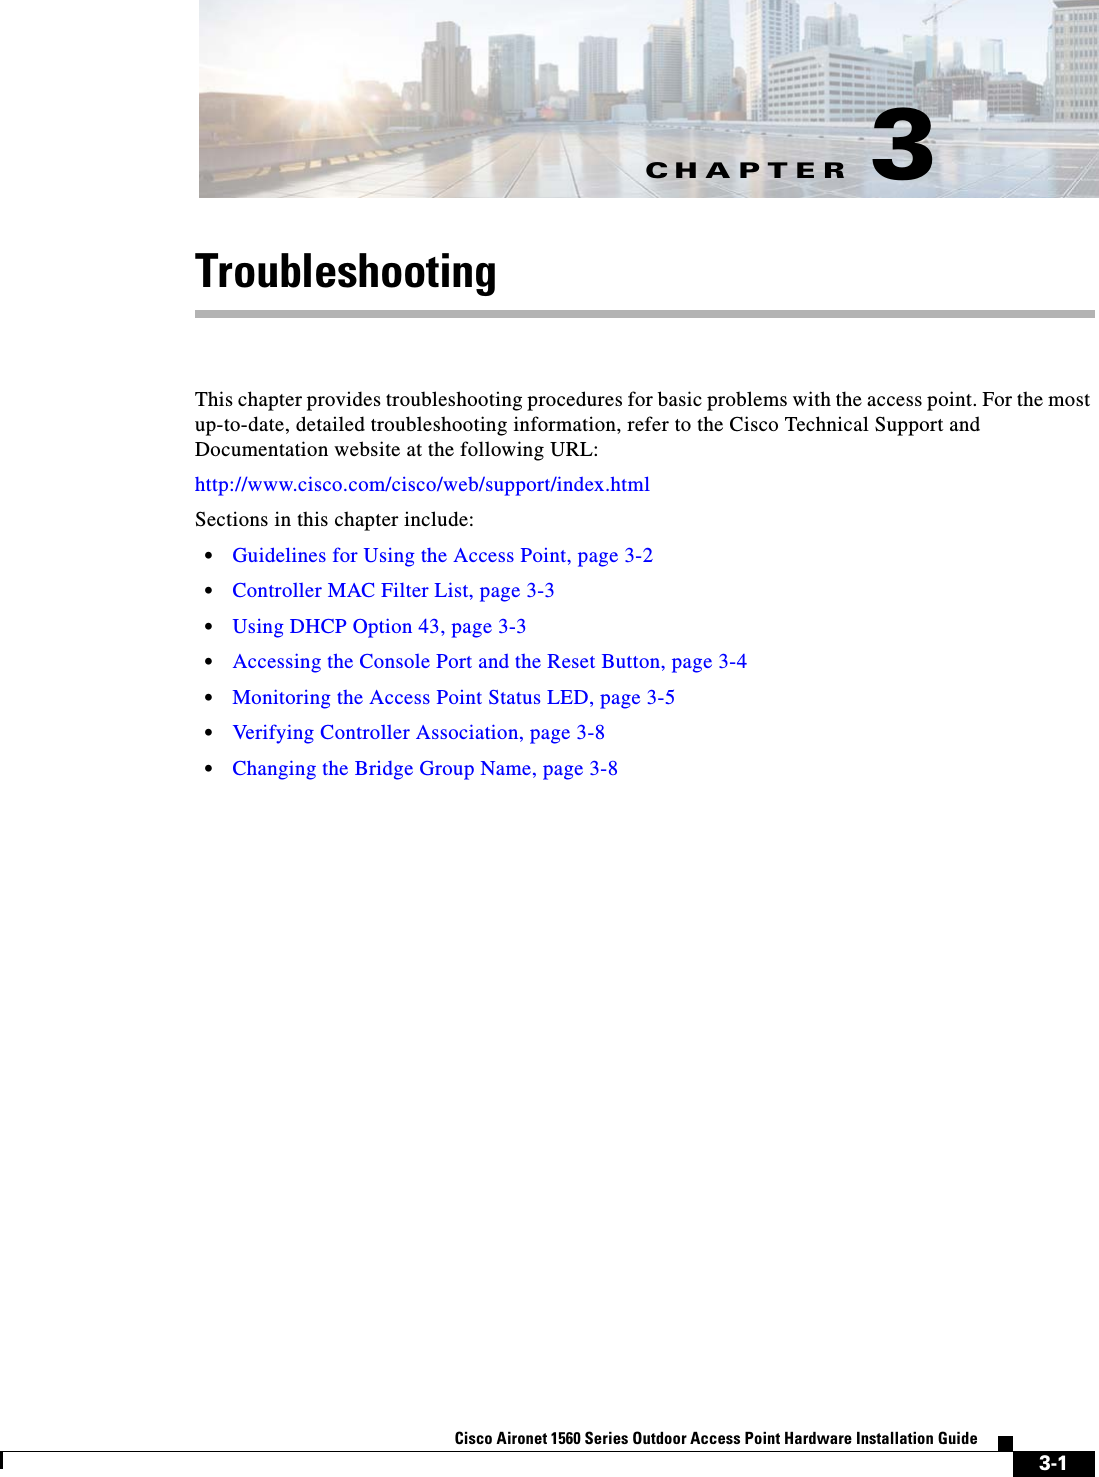 CHAPTER 3-1Cisco Aironet 1560 Series Outdoor Access Point Hardware Installation Guide 3TroubleshootingThis chapter provides troubleshooting procedures for basic problems with the access point. For the most up-to-date, detailed troubleshooting information, refer to the Cisco Technical Support and Documentation website at the following URL:http://www.cisco.com/cisco/web/support/index.htmlSections in this chapter include:•Guidelines for Using the Access Point, page 3-2•Controller MAC Filter List, page 3-3•Using DHCP Option 43, page 3-3•Accessing the Console Port and the Reset Button, page 3-4•Monitoring the Access Point Status LED, page 3-5•Verifying Controller Association, page 3-8•Changing the Bridge Group Name, page 3-8